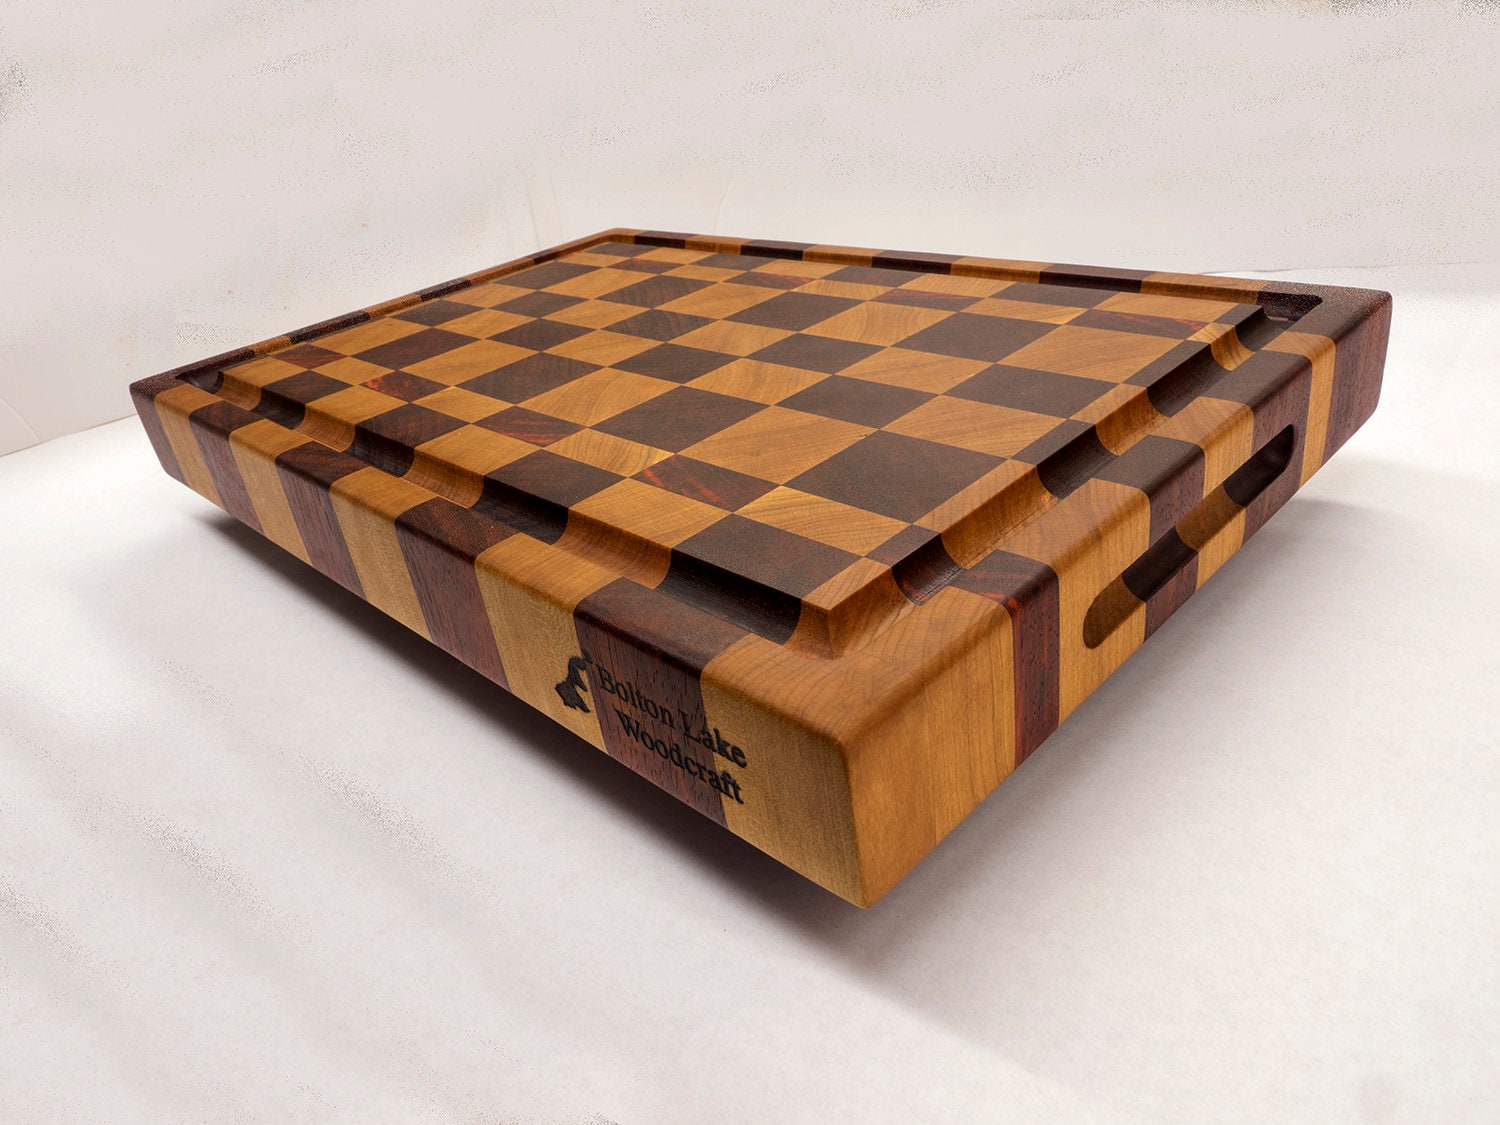 Large Checkered Board - Handcrafted Cutting Boards - Chopping Boards